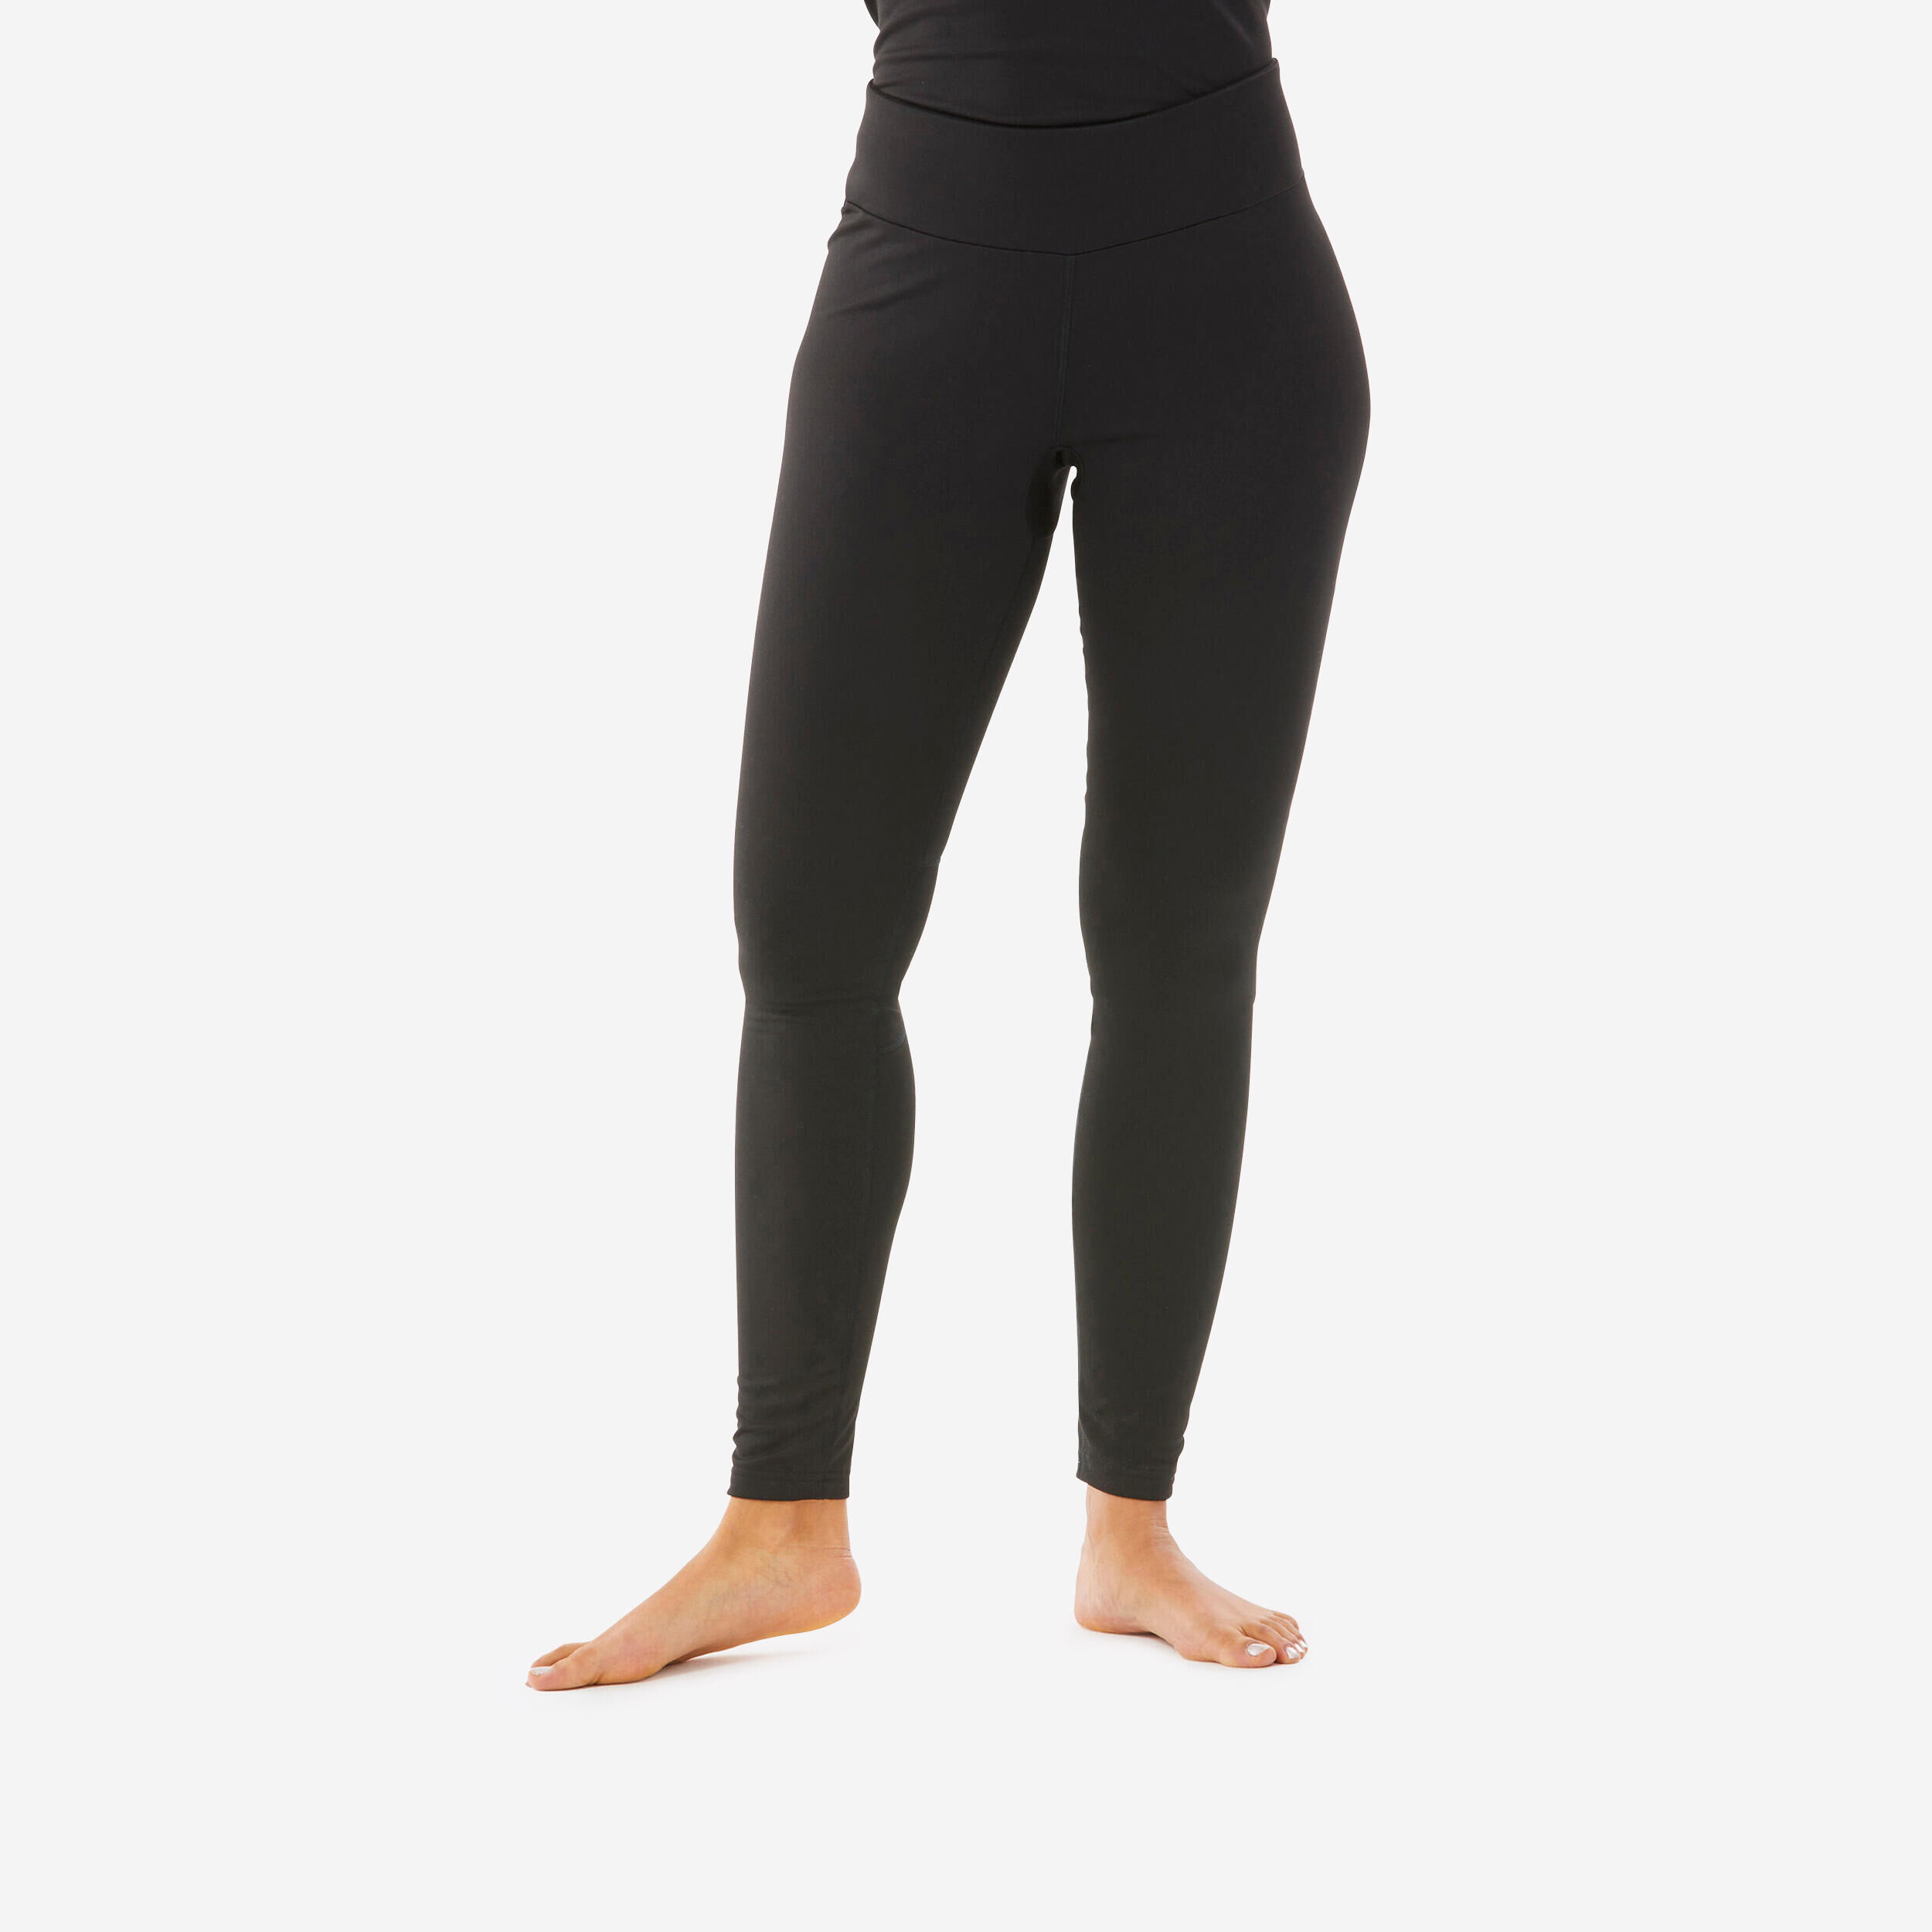 Thermal Underwear for Women (Thermal Long Johns) Sleeve Shirt & Pants Set, Base  Layer w/Leggings Bottoms Ski/Extreme Cold Coral XS at  Women's  Clothing store